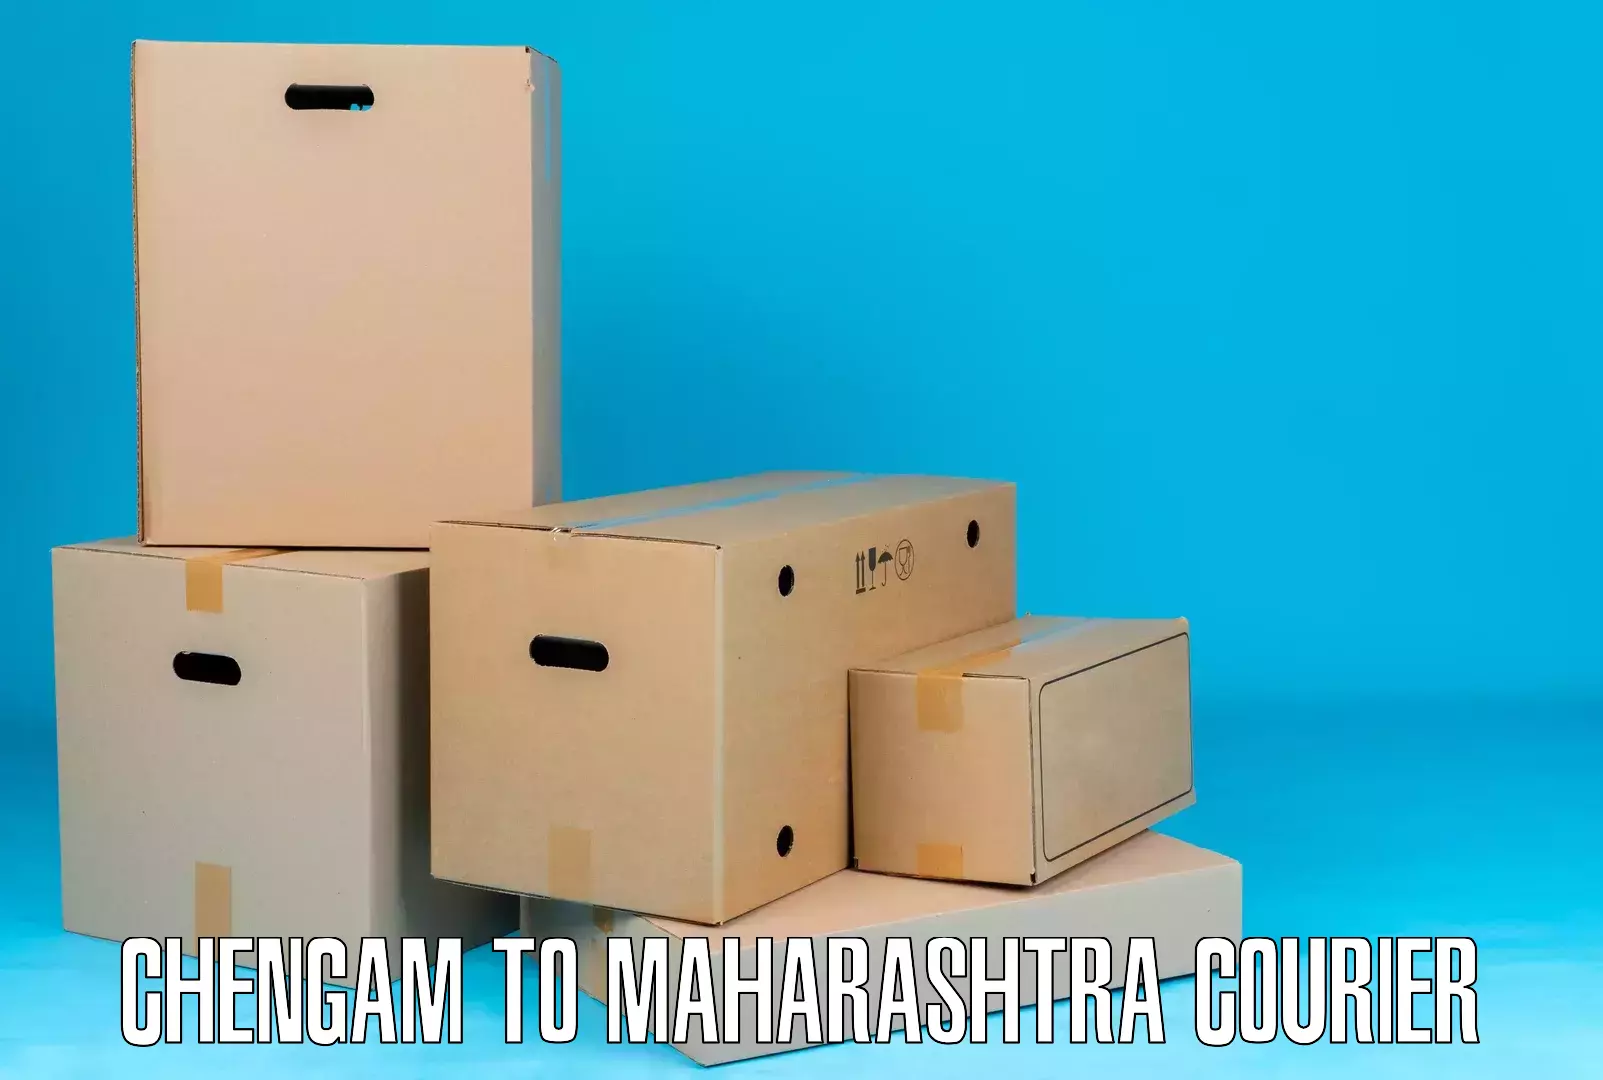 Expedited shipping methods Chengam to DY Patil Vidyapeeth Pune